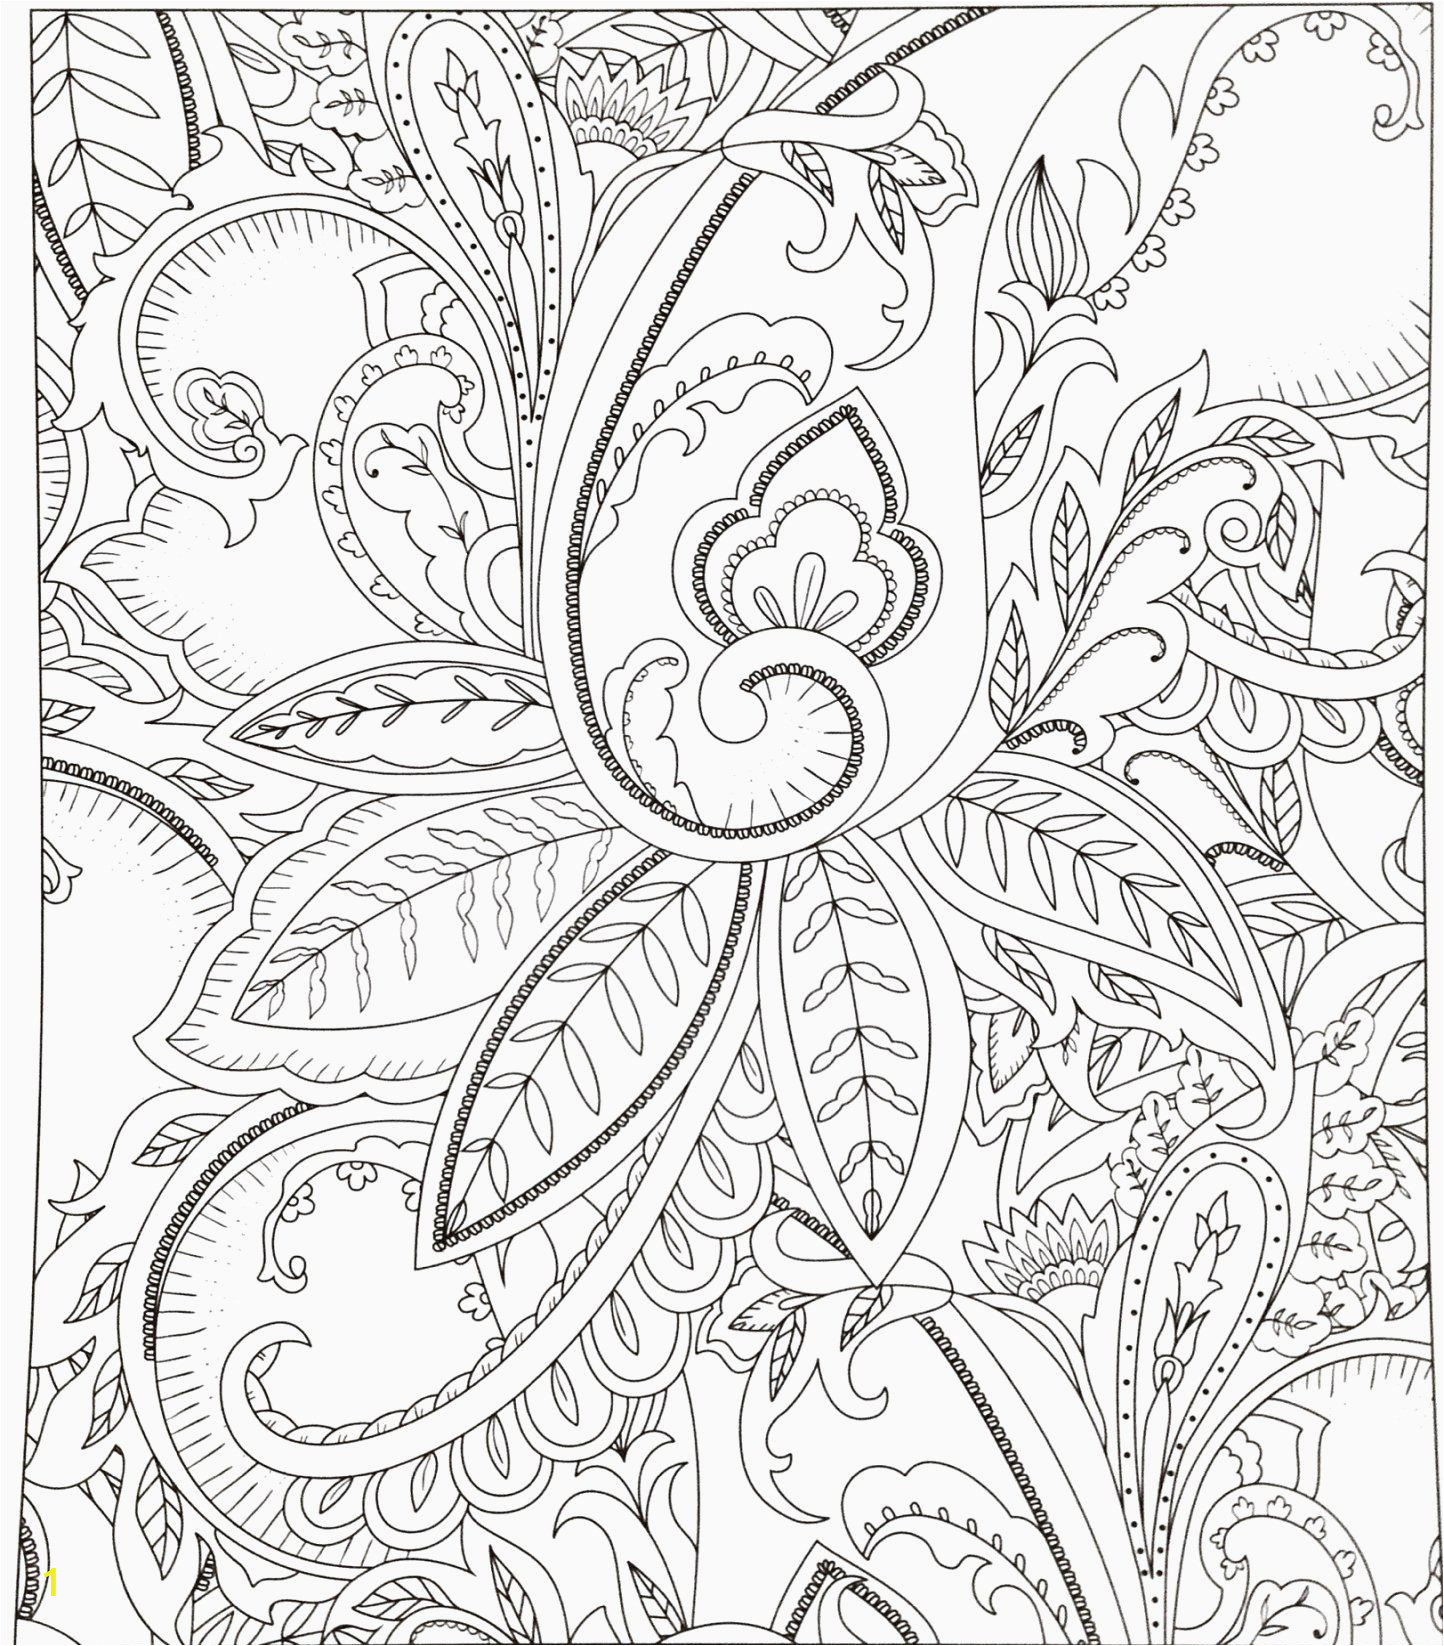 Coloring Pages You Can Color On the Computer Happy Coloring Pages for Adults